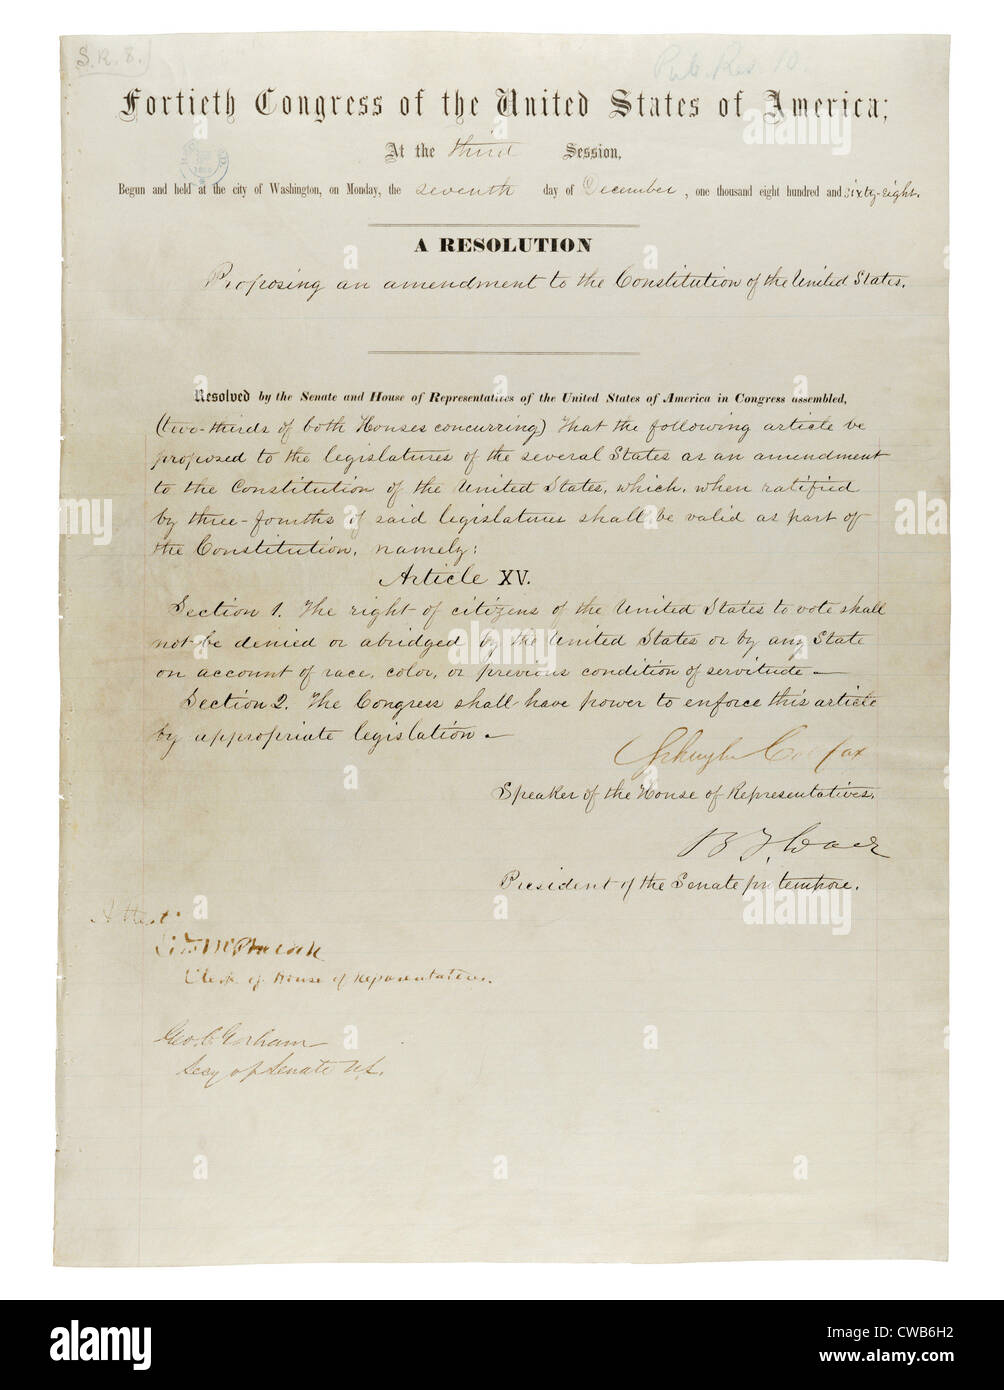 15th Amendment to the U.S. Constitution: Voting Rights (1870)Passed by Congress February 26, 1869, and ratified February 3, Stock Photo